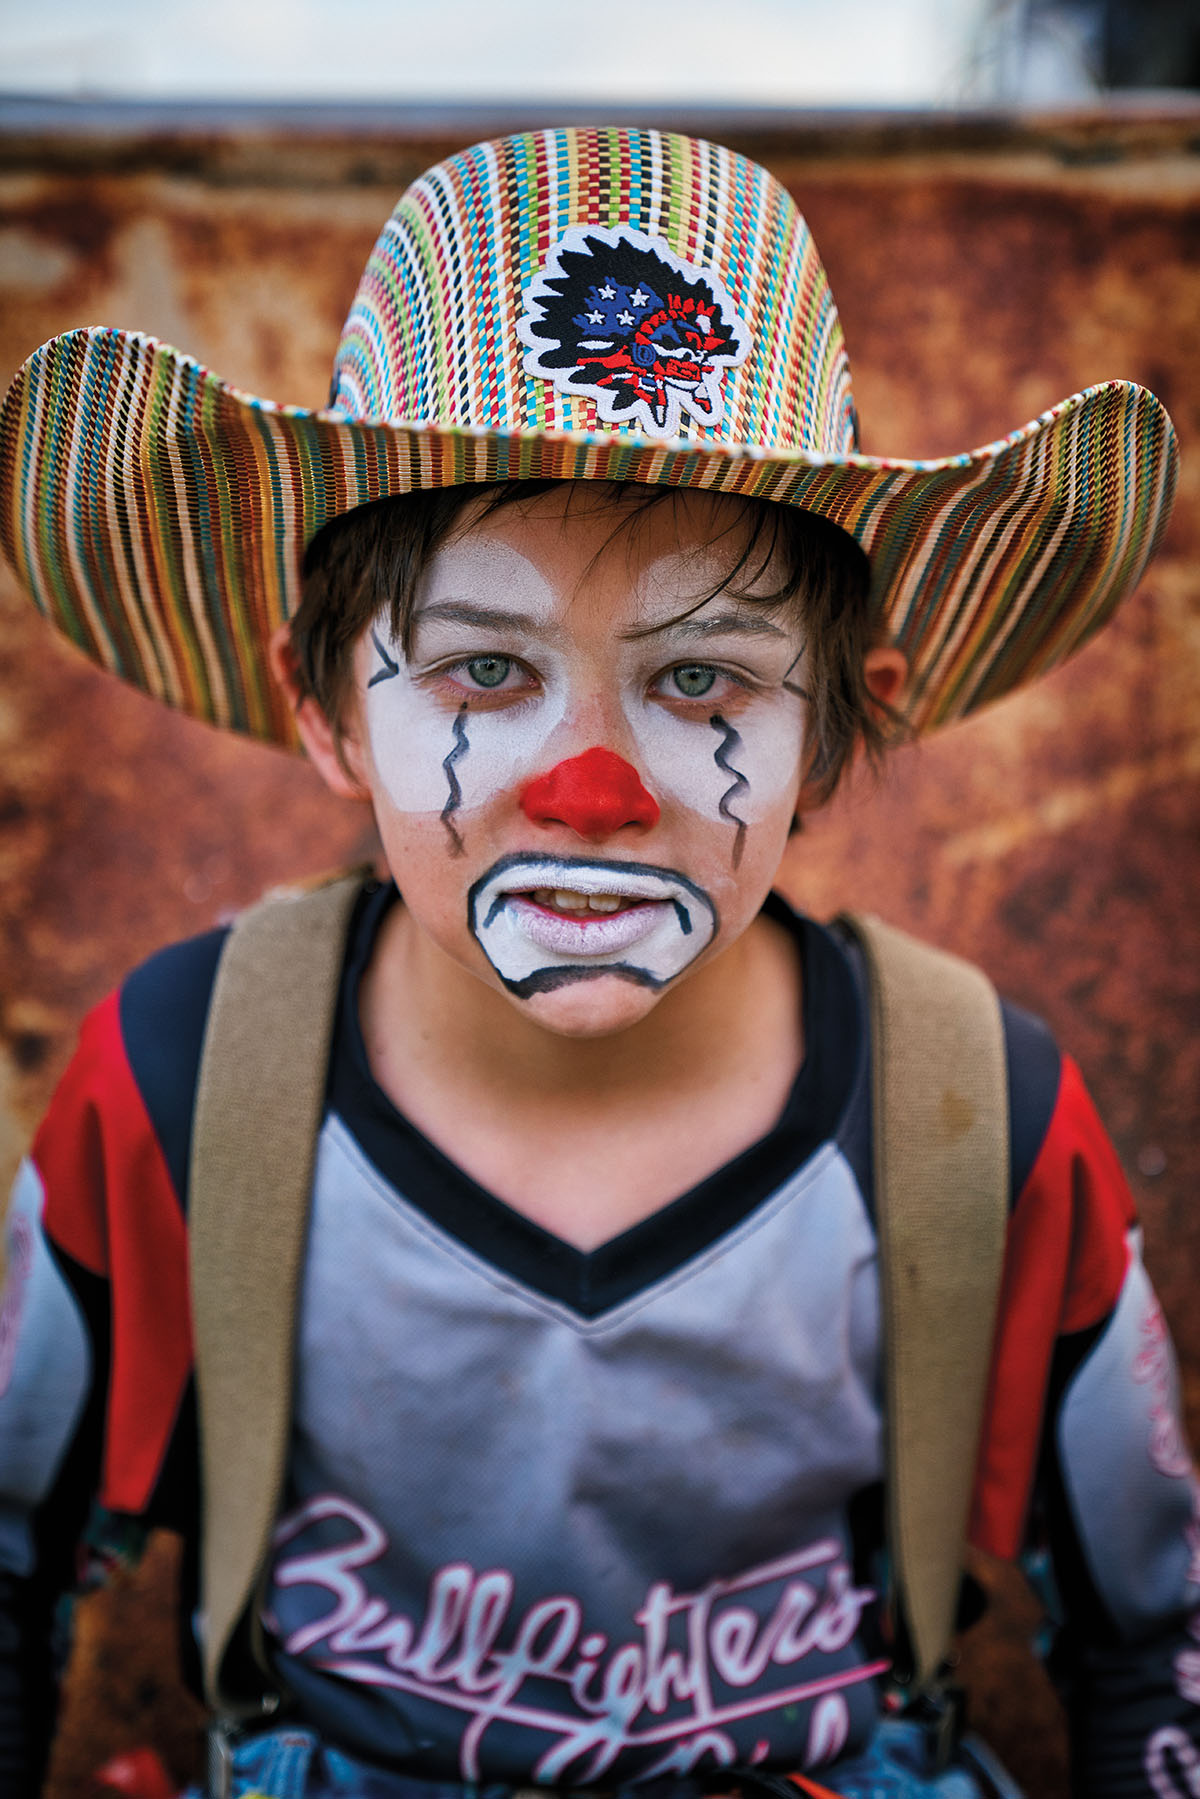 A young man in a striped cowboy hat, white paint around his eyes and mouth, a red nose, and a bright red and gray shirt looks into the camera